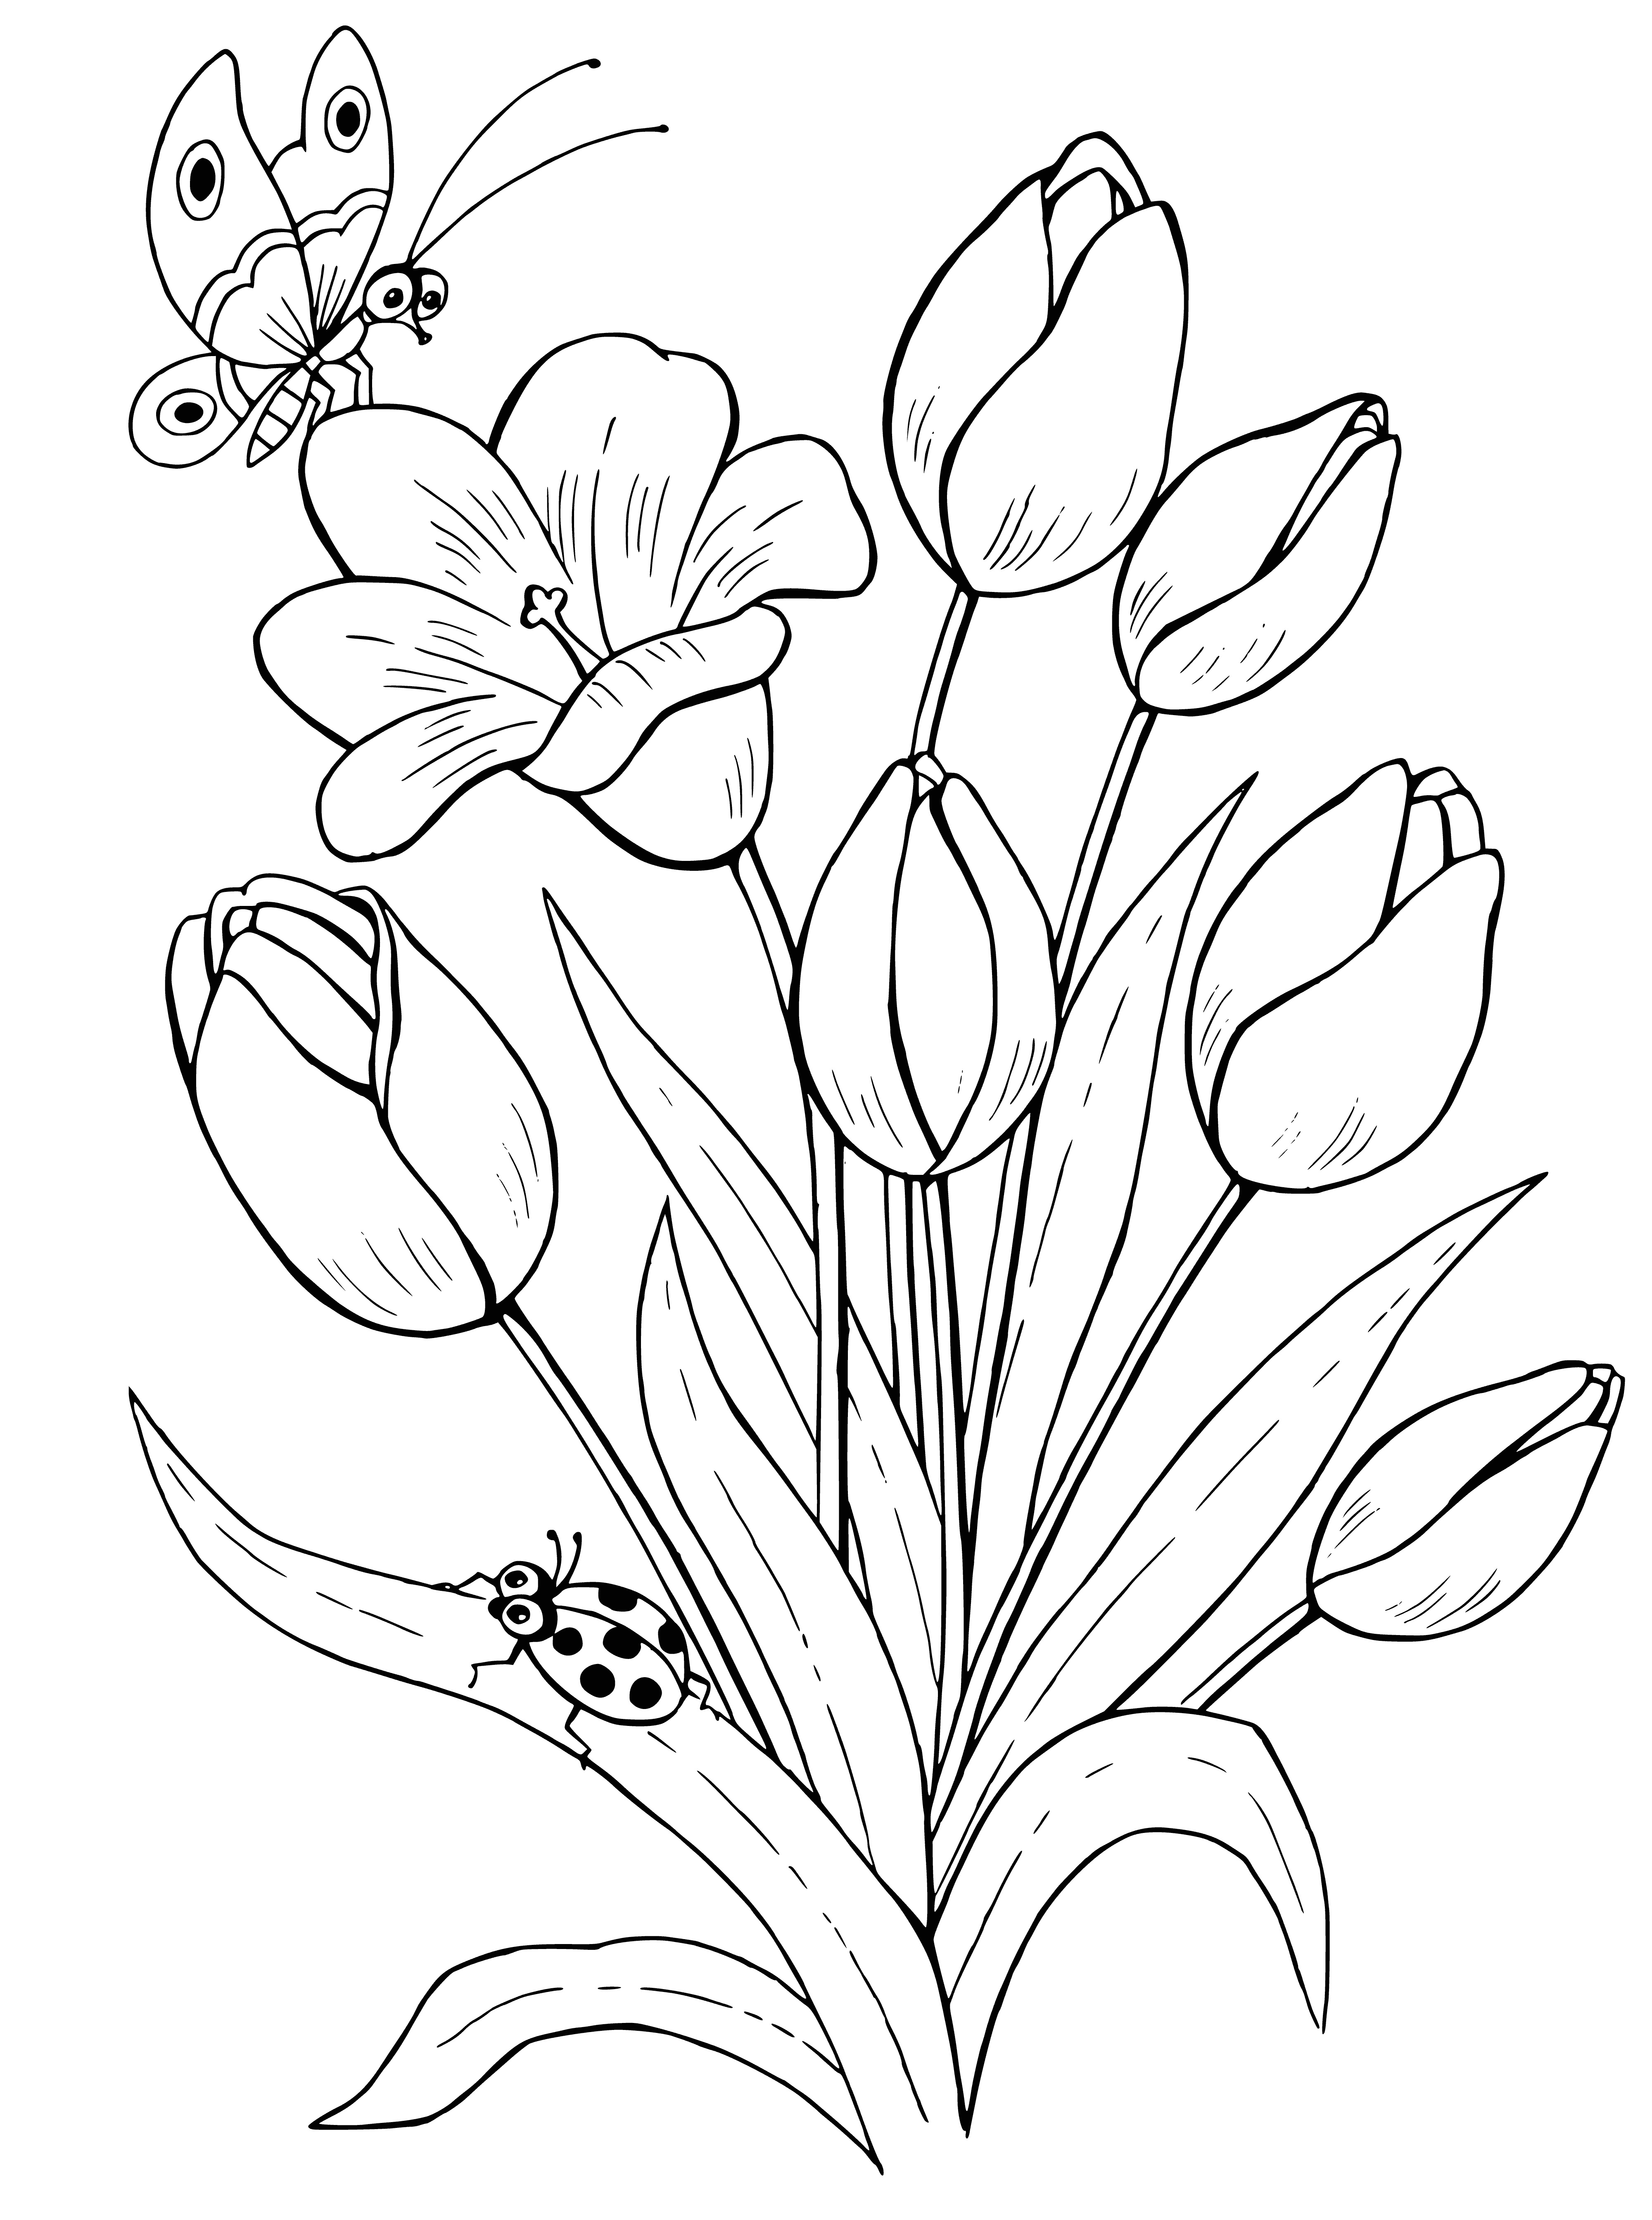 coloring page: Tulips are Eurasian flowers with bright, pointed petals, thin stems, and long, thin leaves. Commonly found in Netherlands.